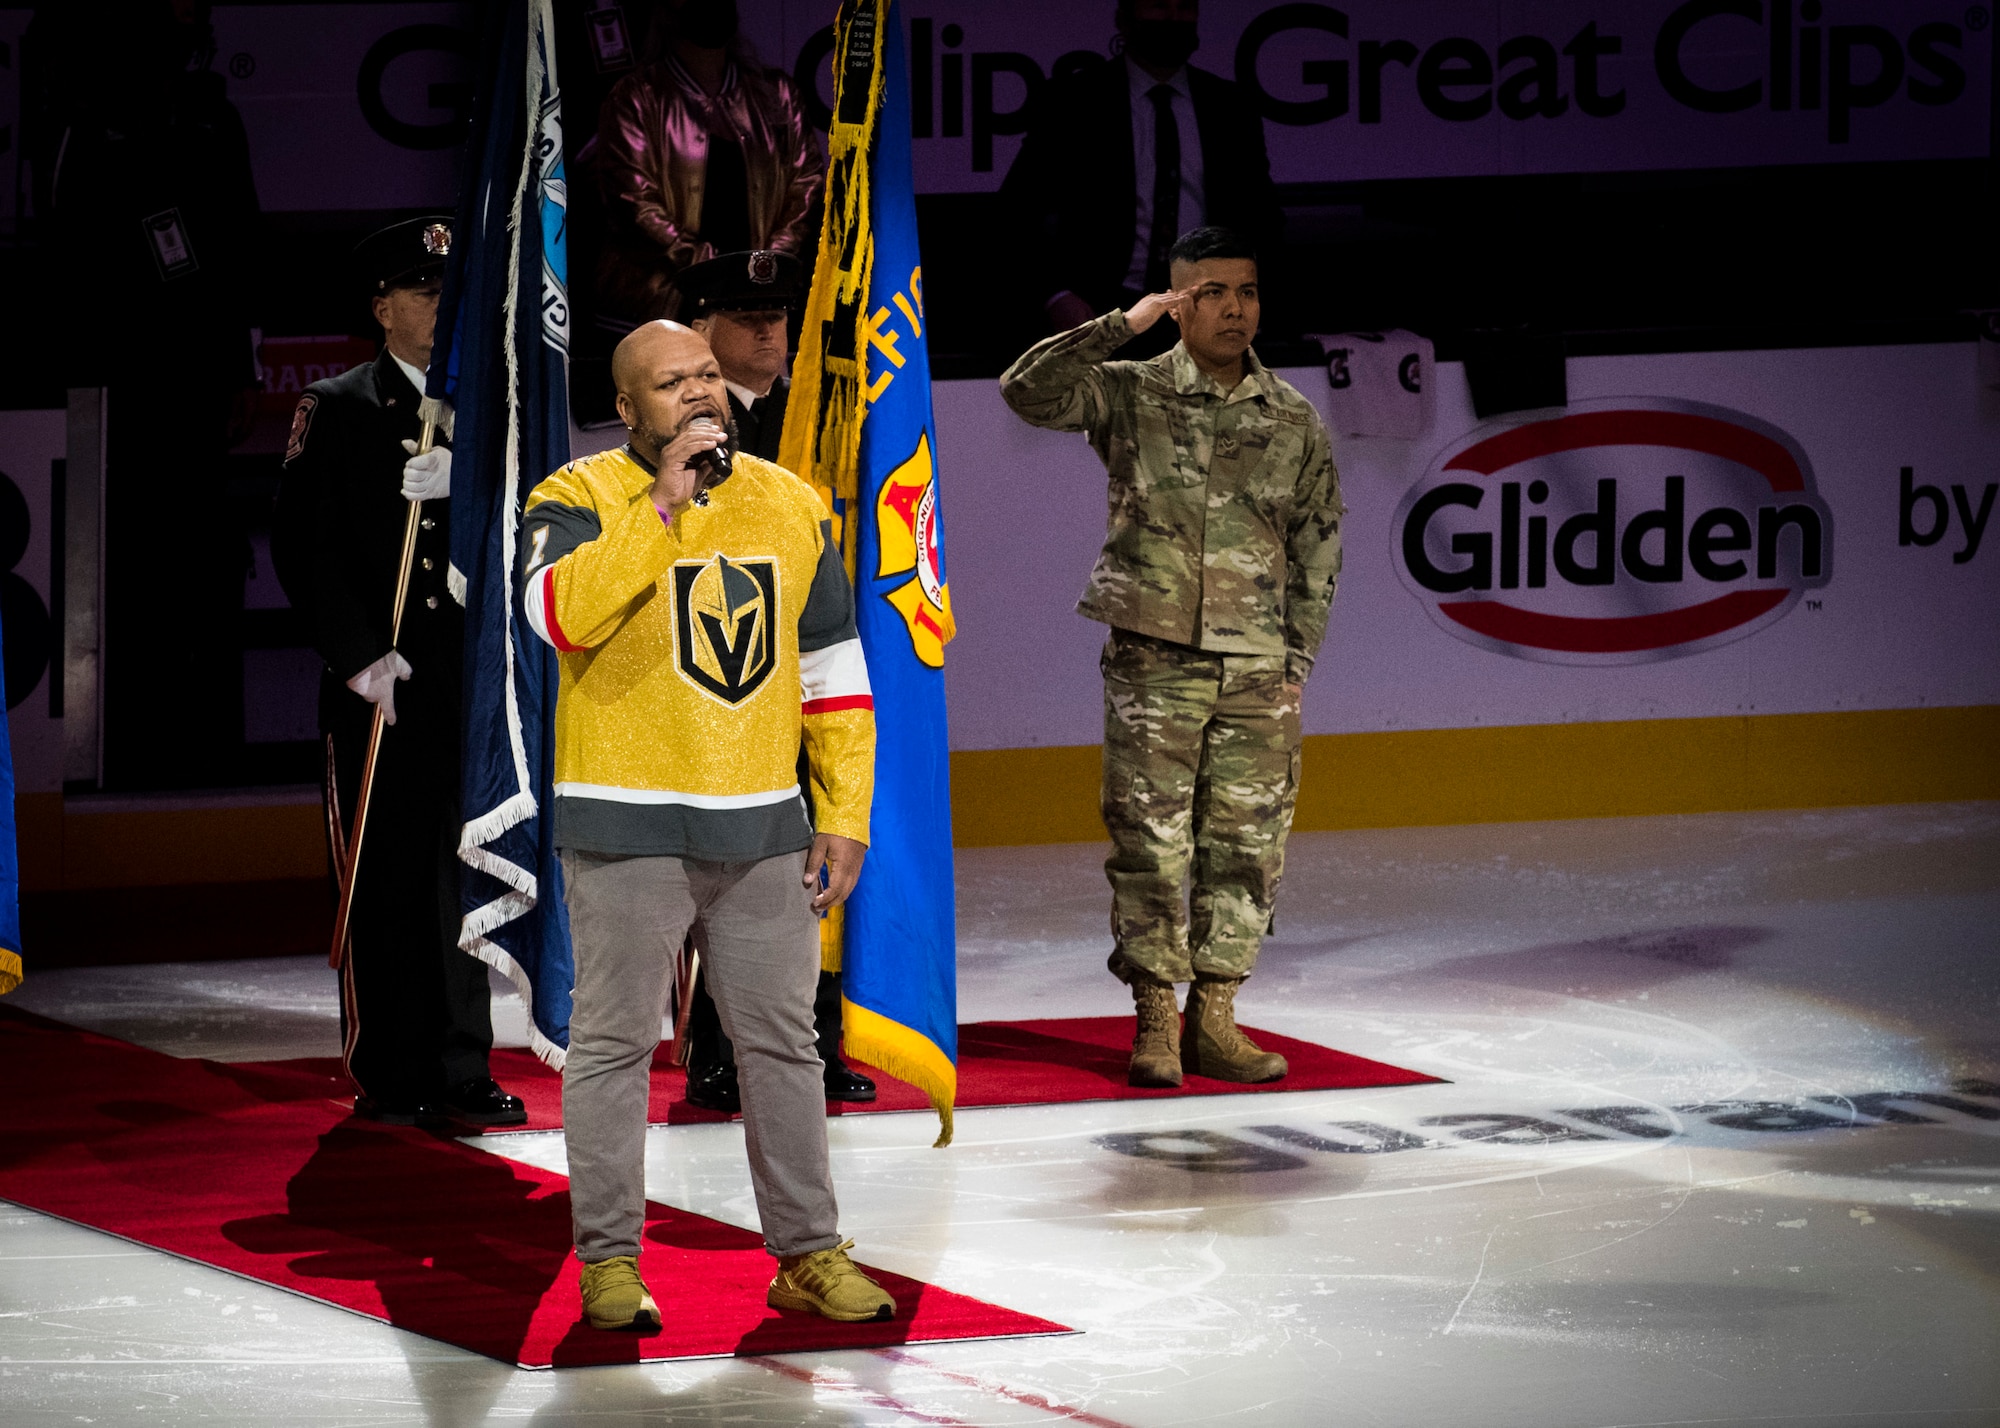 Senior Airman Fernando Cruz, 926th Wing reservist, renders a salute during the National Anthem at the National Hockey League All Stars game, Feb. 4, 2022, at T-Mobile Arena in Las Vegas, Nev. The NHL All Stars game was hosted in Las Vegas and hosts some of the most talented players in a friendly exhibition game. 